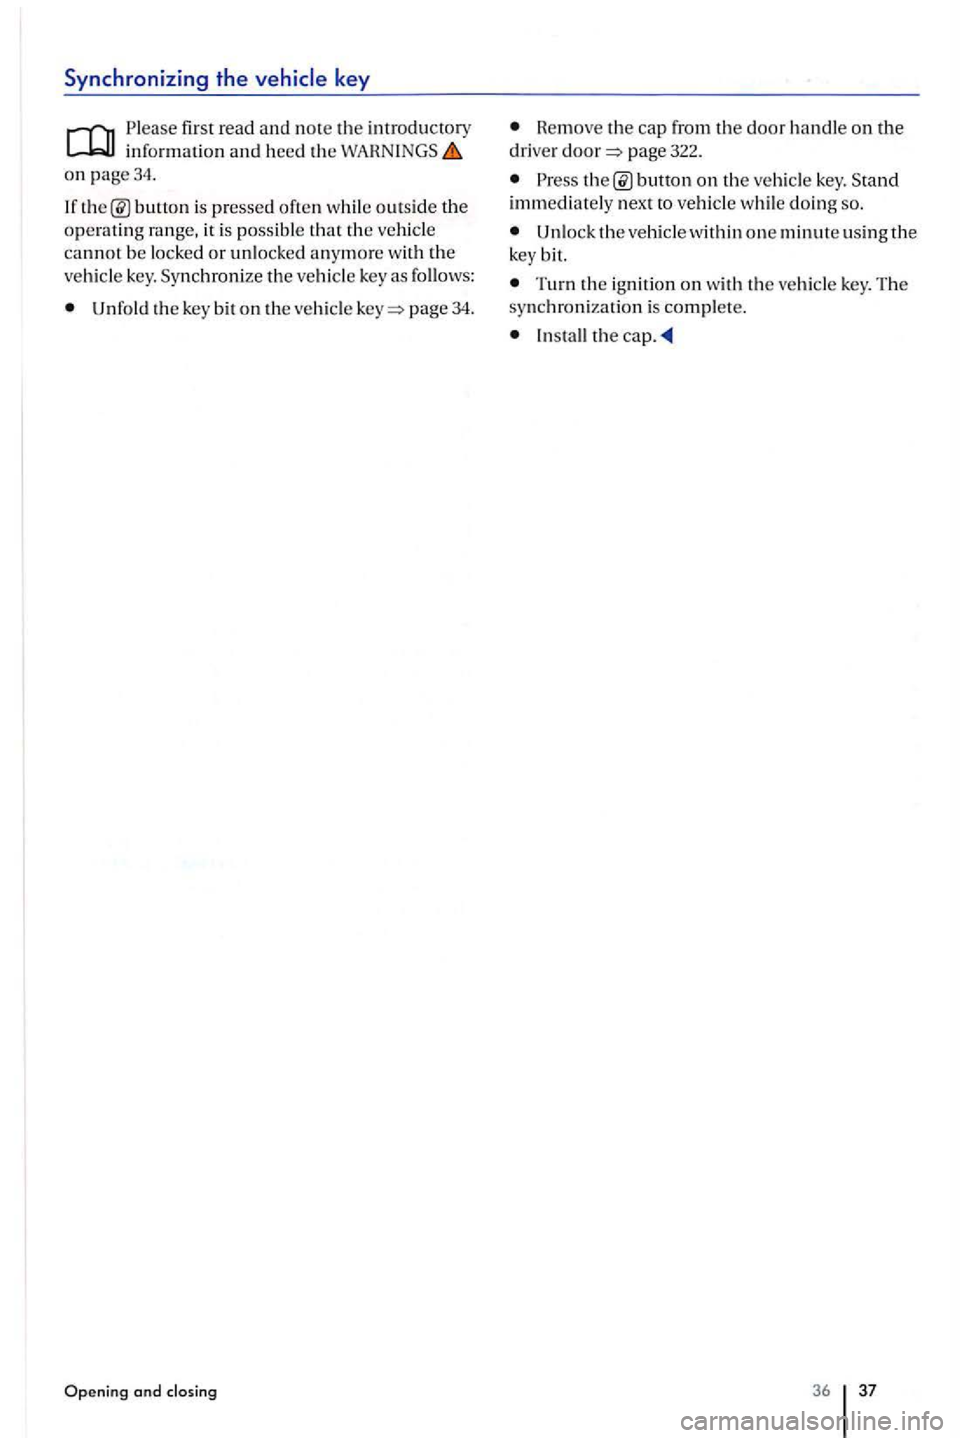 VOLKSWAGEN GOLF PLUS 2004  Owners Manual Synchronizing  the 
first  read and note the introductory informa ti on and h ee d th e on page34. 
Unfold  the key bit on veh icle page  34. 
Opening and closing 
Hemove the cap from the door handle 